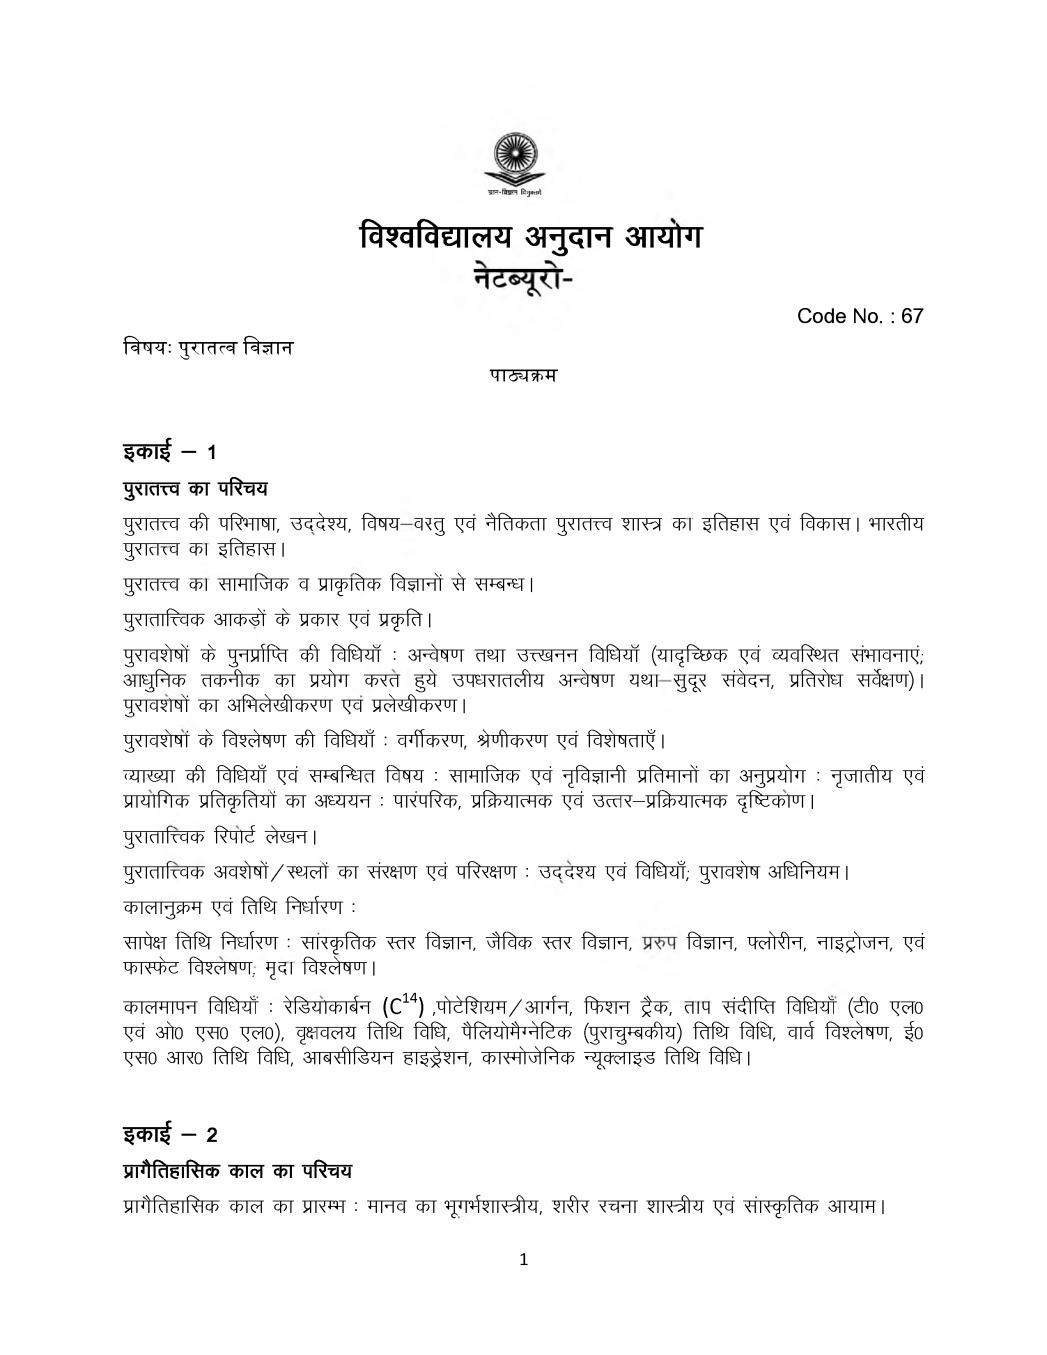 UGC NET Syllabus for Archaeology 2020 in Hindi - Page 1